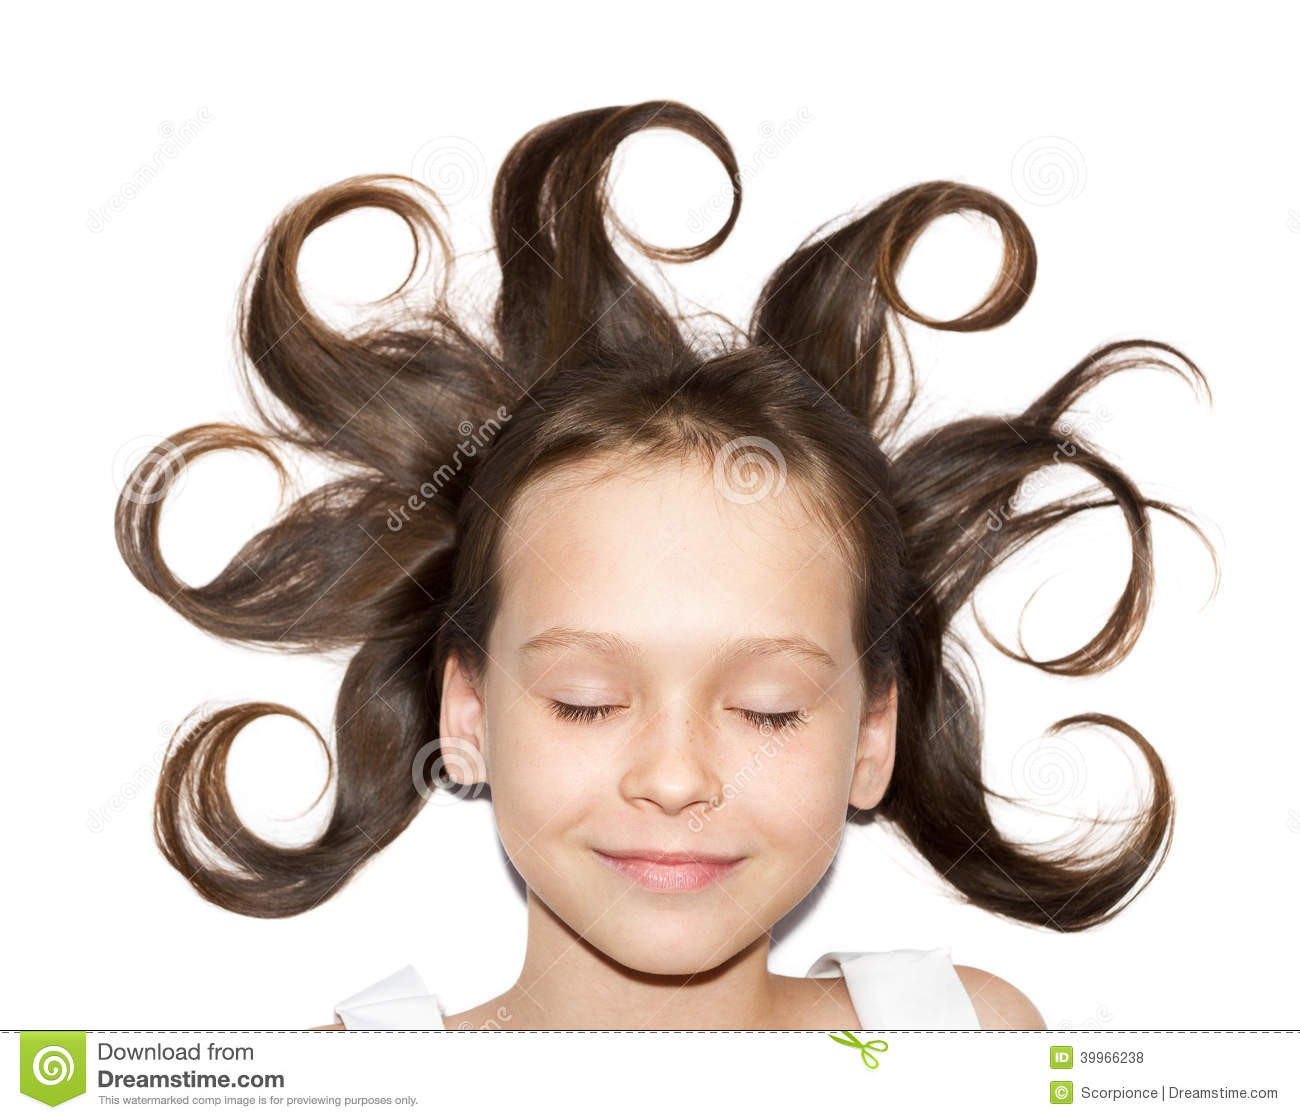 Funny Girl Hairstyles
 Little Girl With Funny Hairstyle Stock Image of